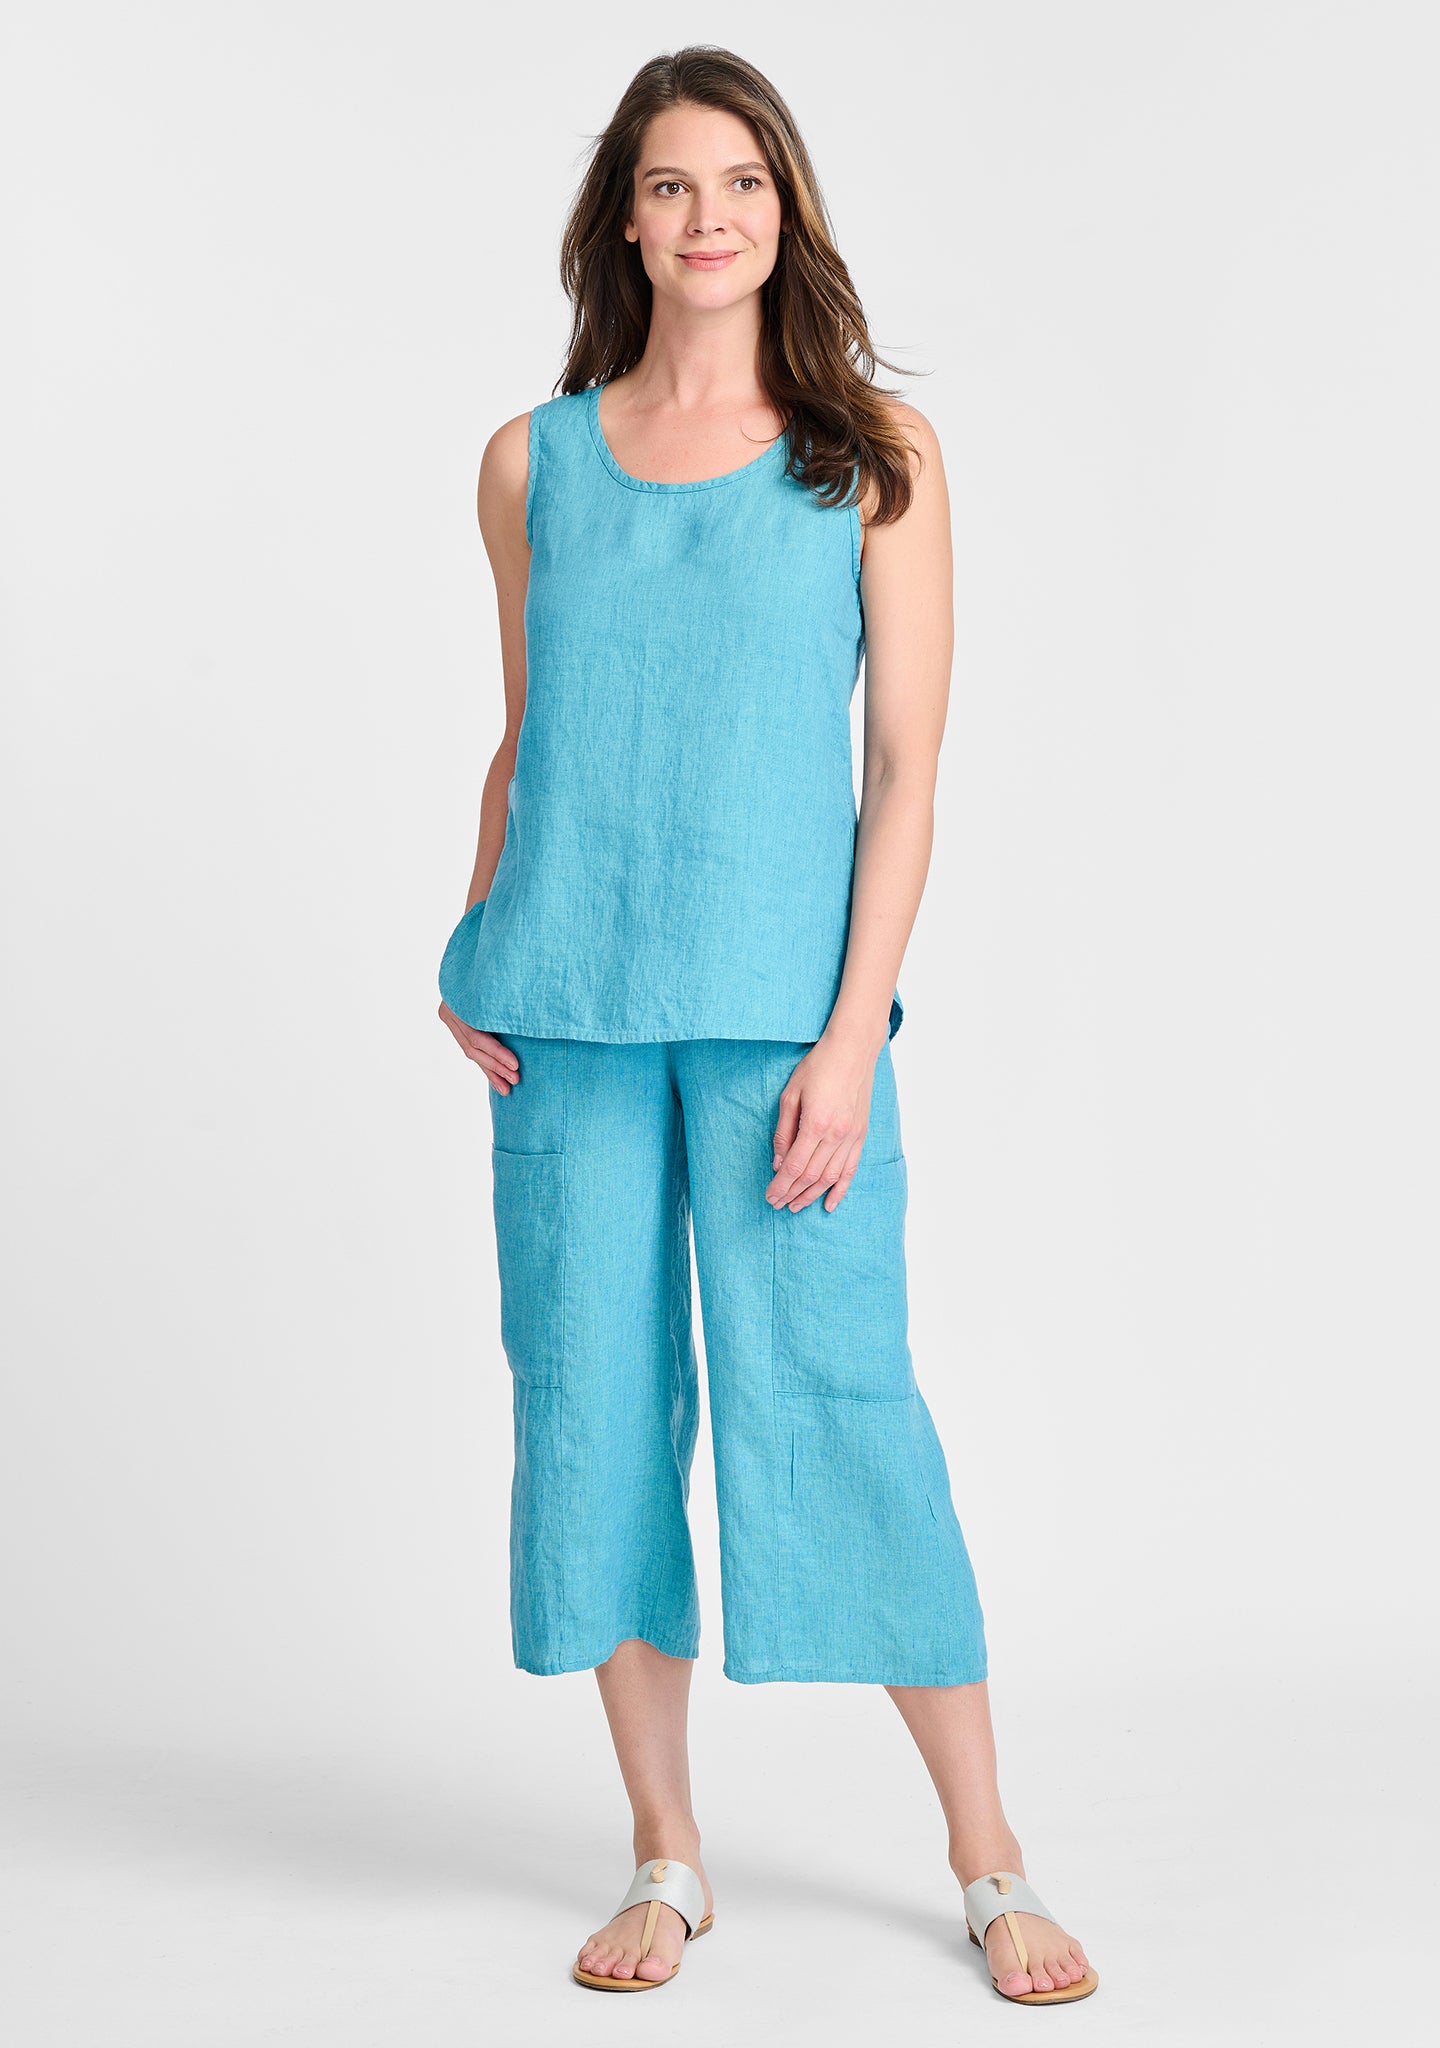 FLAX linen tank in blue with linen pants in blue